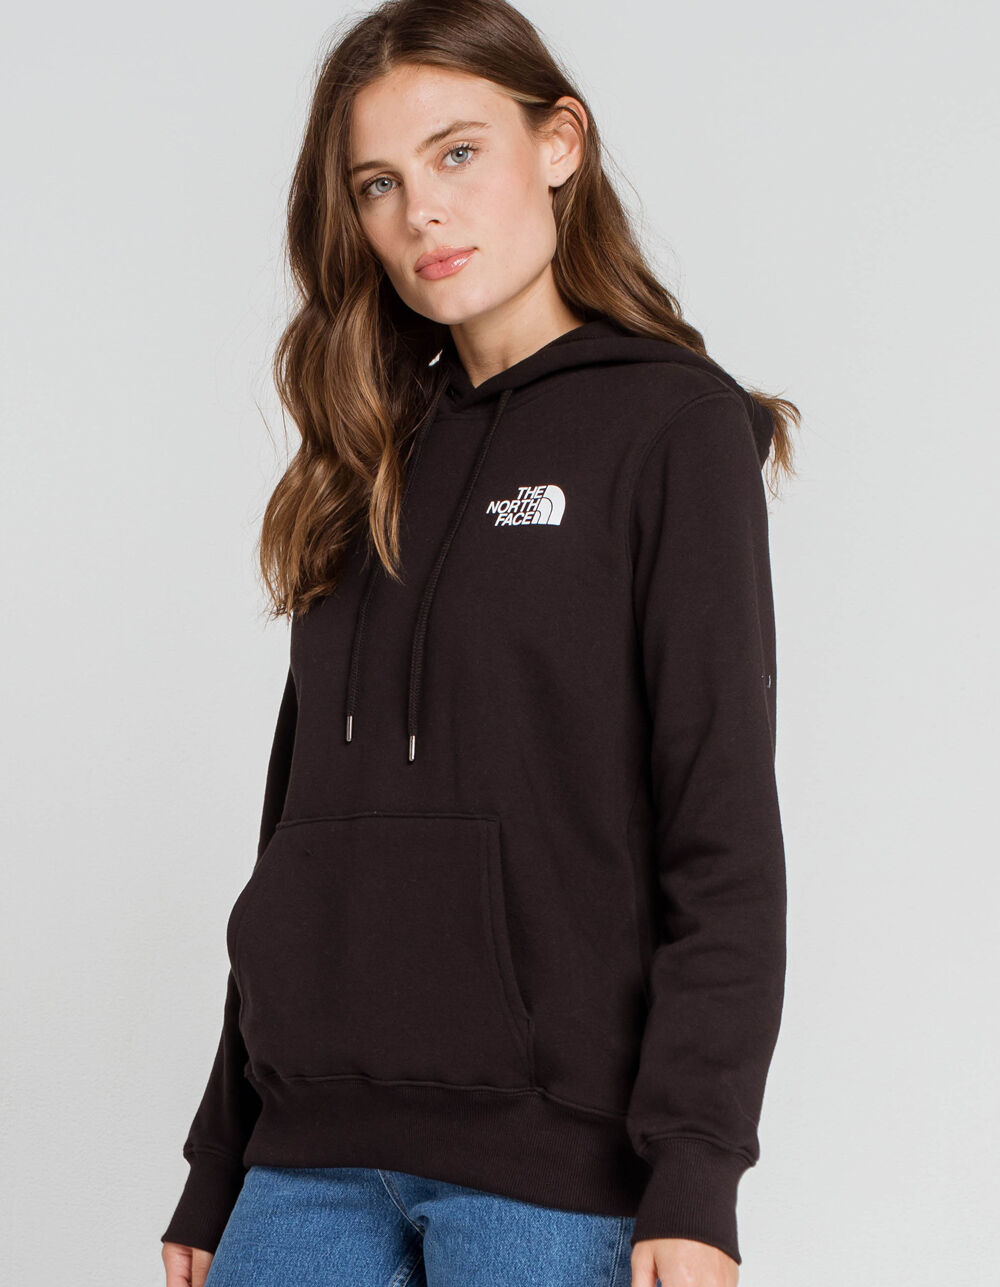 THE NORTH FACE Box NSE Womens Black Hoodie - BLACK | Tillys